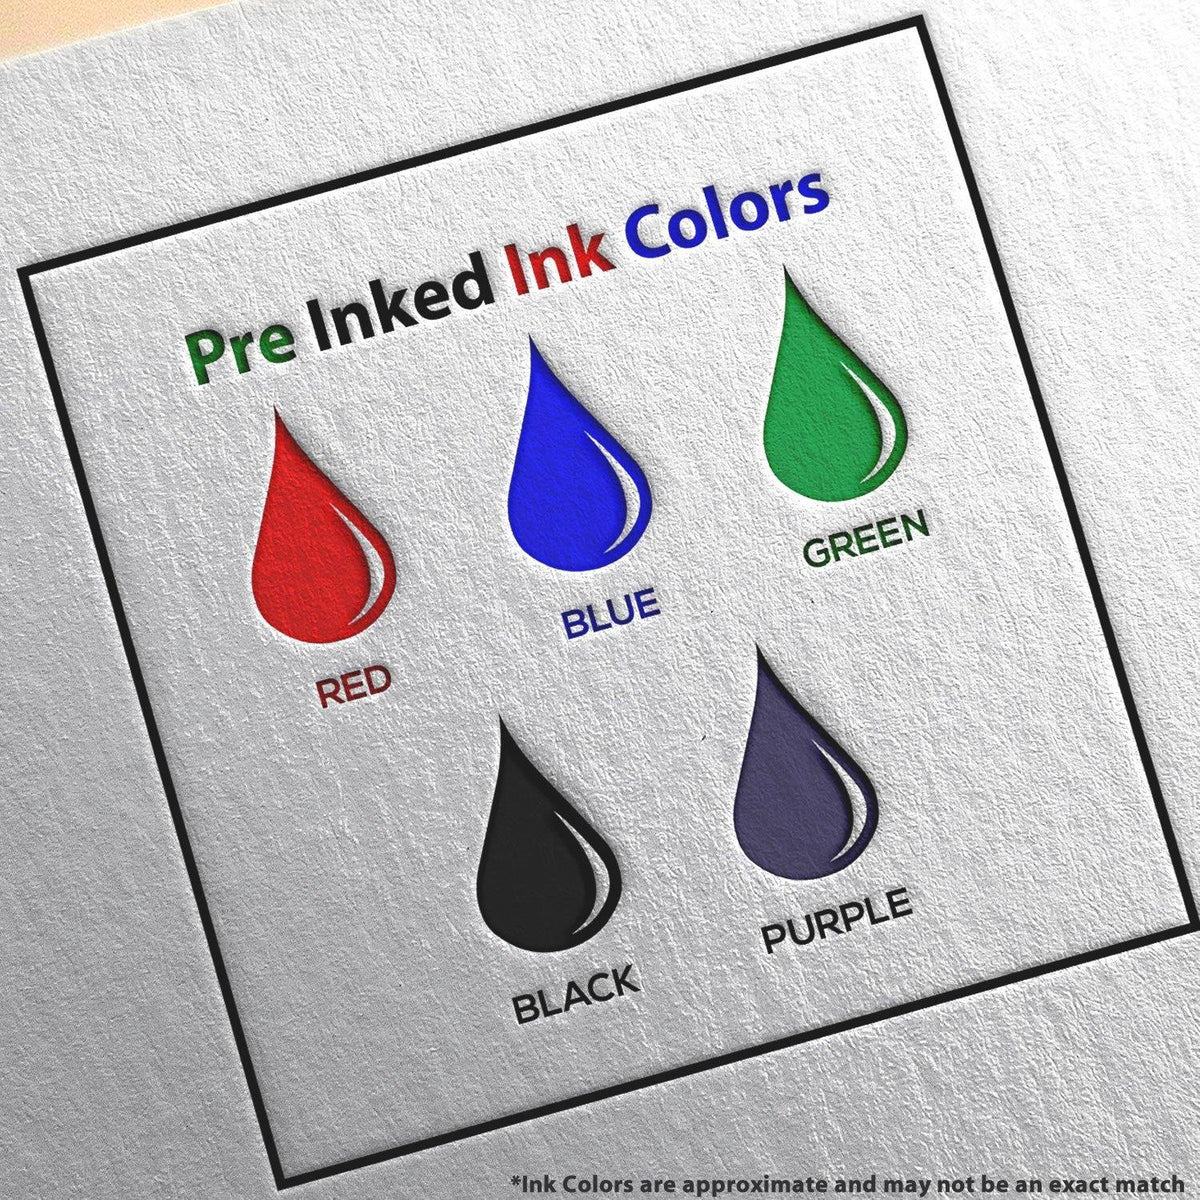 Large Pre-Inked X-Rays Stamp Ink Color Options